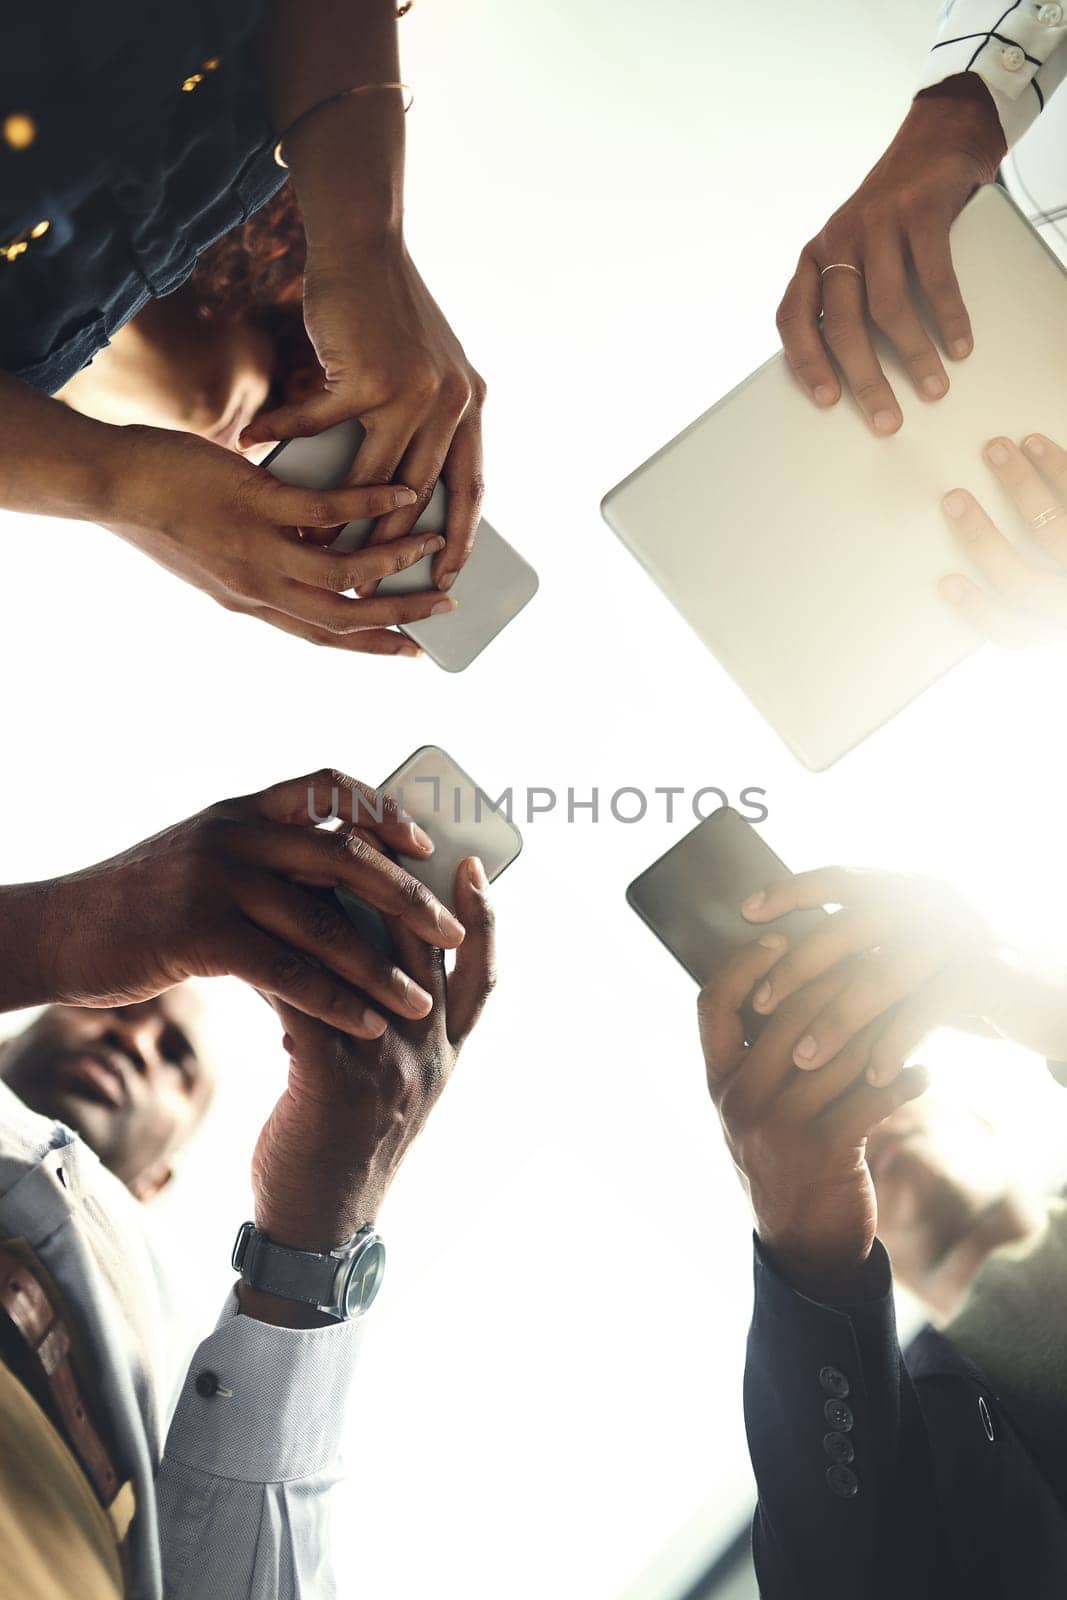 Sharing and storing business updates through the cloud. Closeup shot of a group of businesspeople using their digital devices in synchronicity in an office